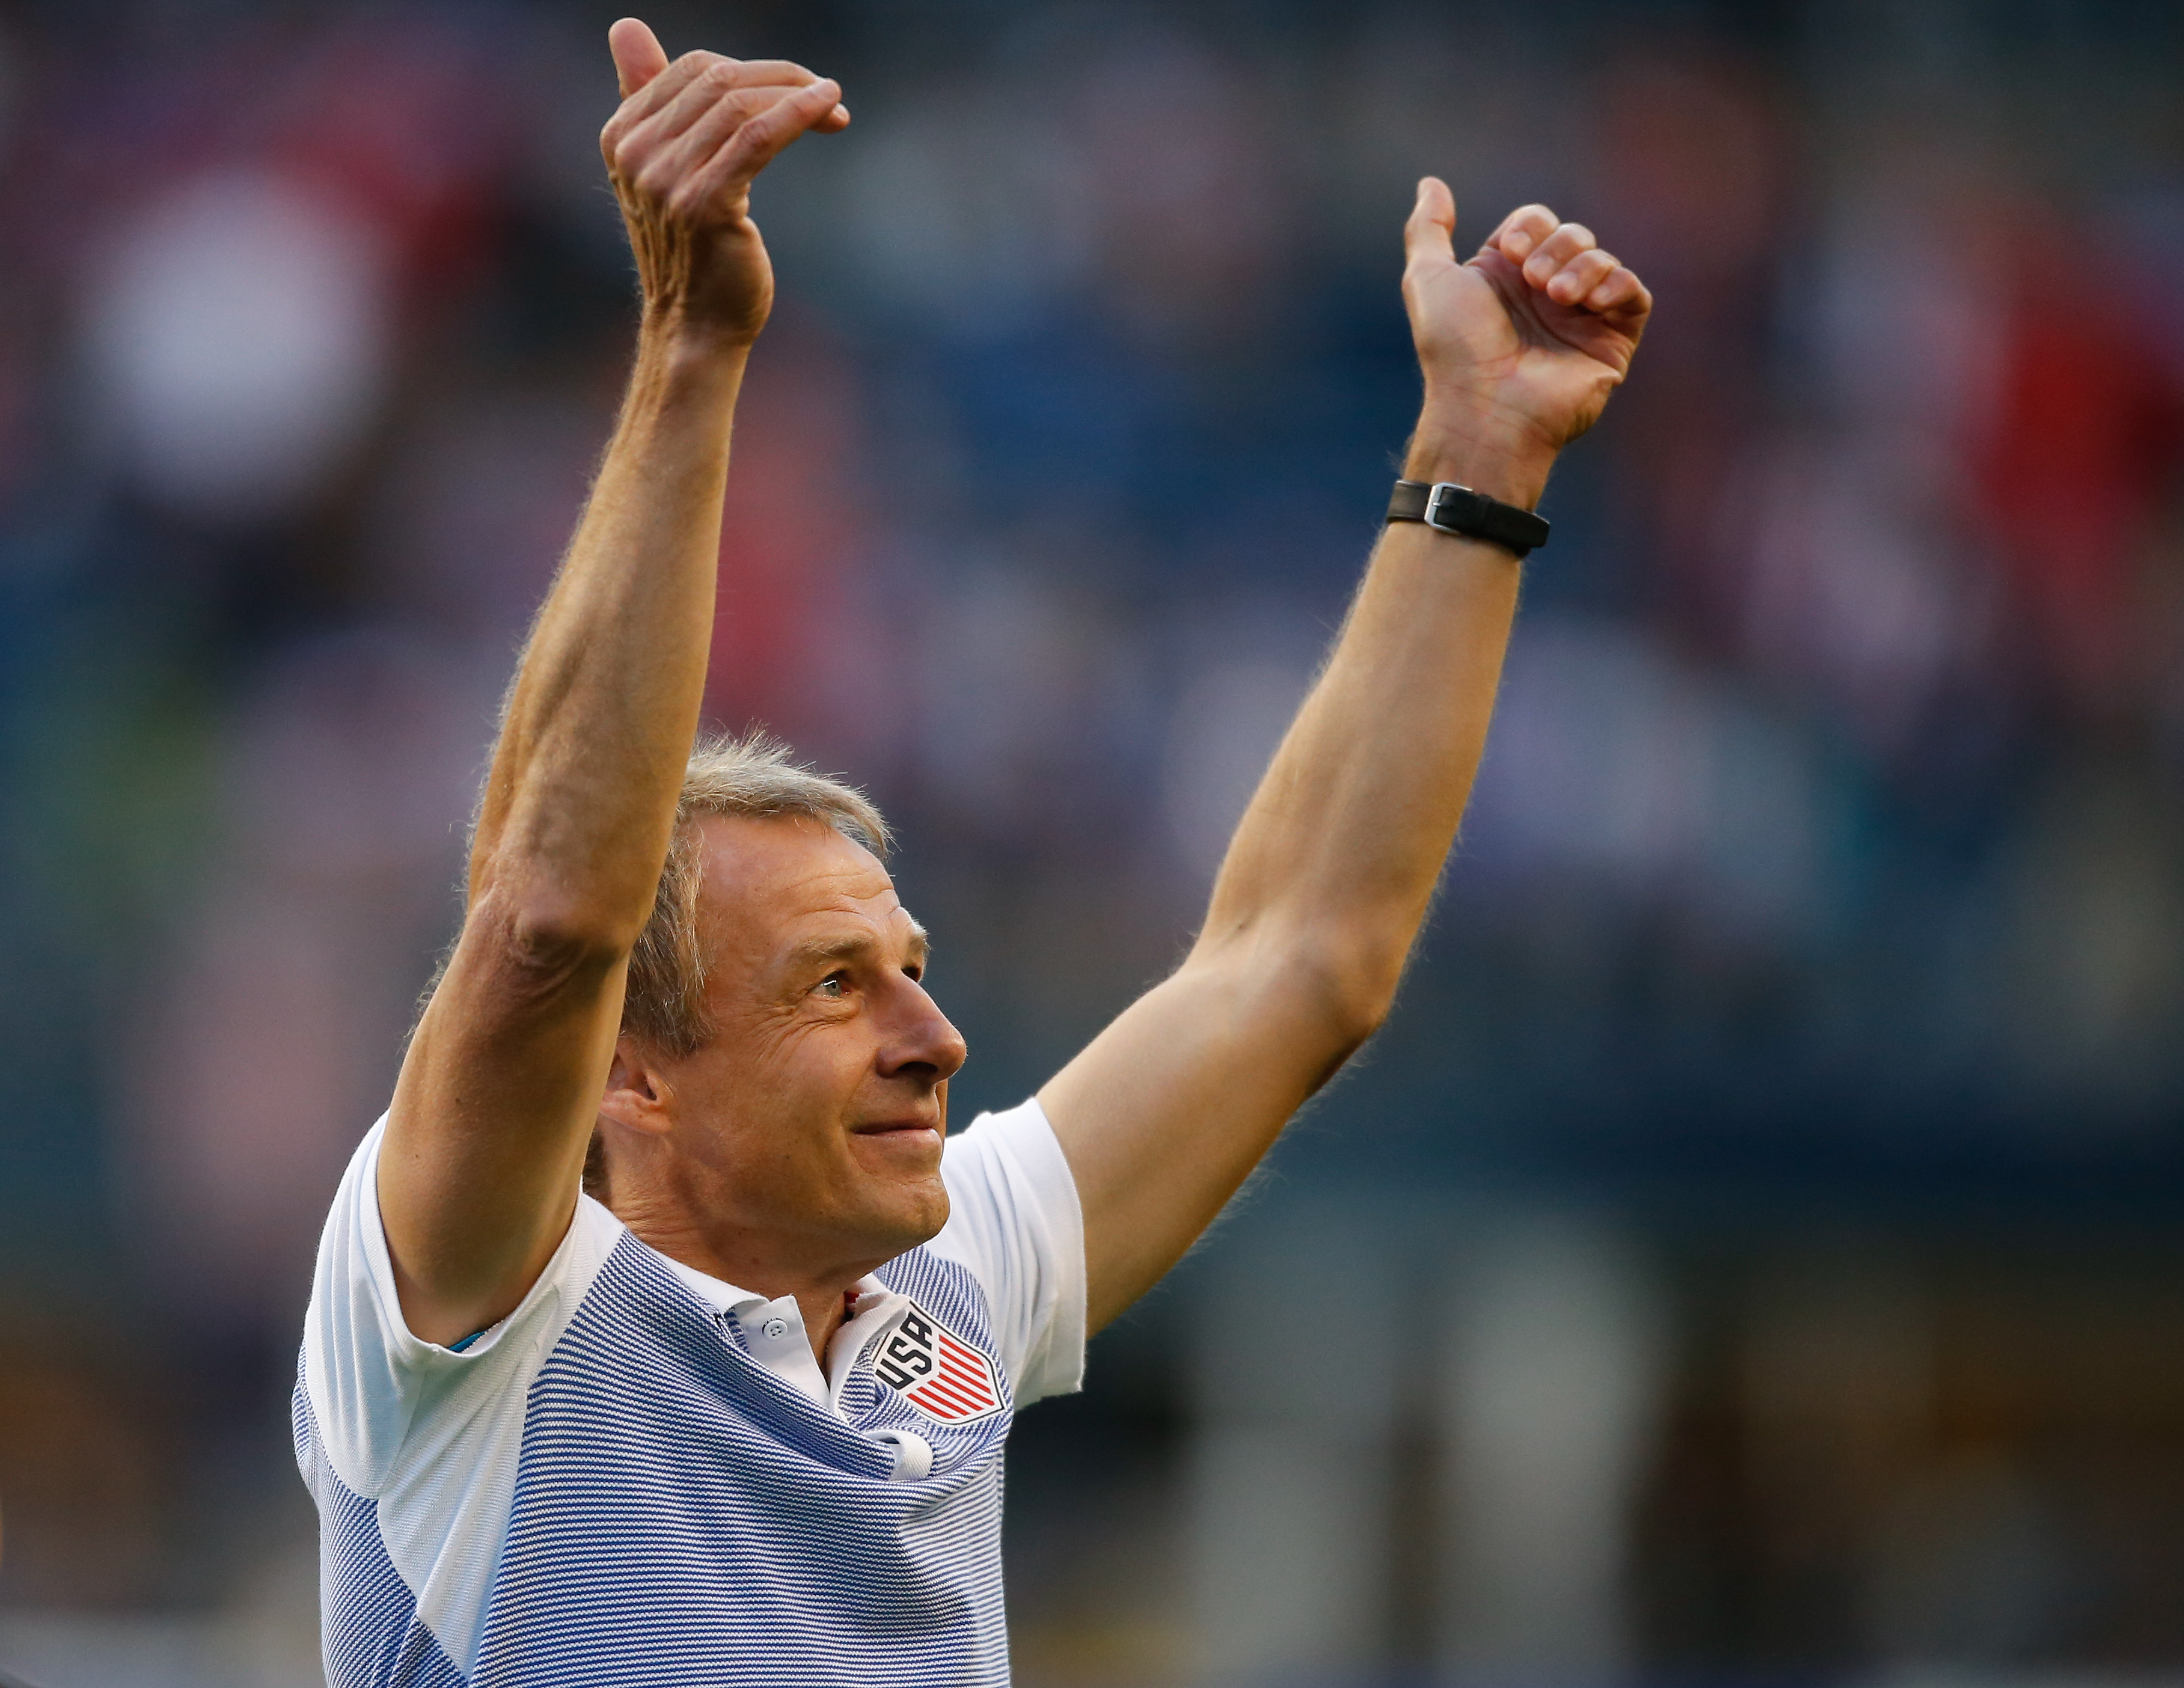 SEATTLE, WA - JUNE 16:  Head coach Jurgen Klinsmann of the United States gestures as he walks off the pitch after defeating Ecuador in the 2016 Quarterfinal - Copa America Centenario match at CenturyLink Field on June 16, 2016 in Seattle, Washington.  (Photo by Otto Greule Jr/Getty Images)